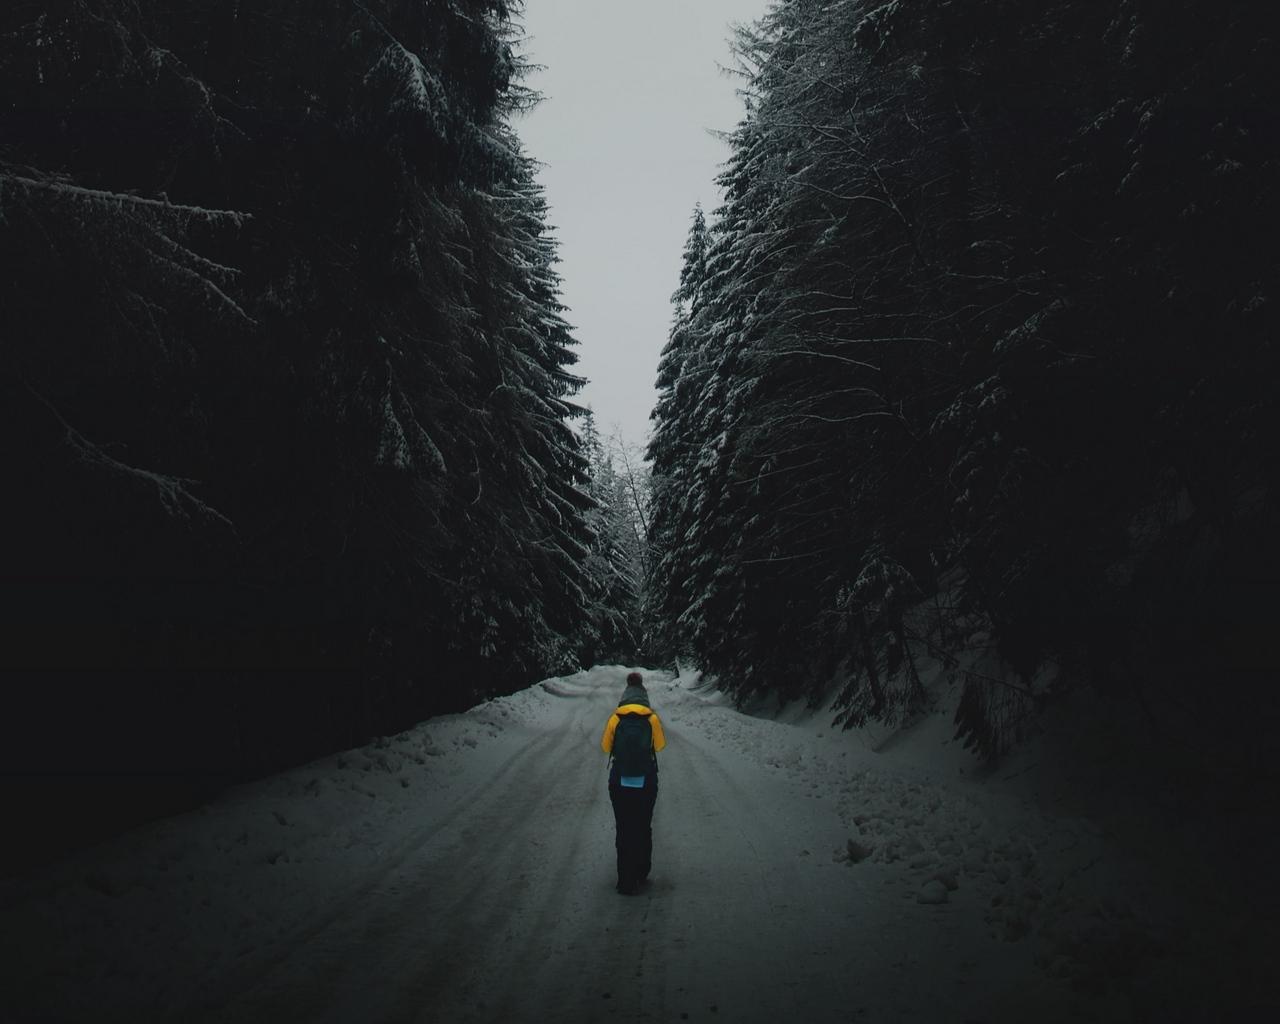 Download wallpaper 1280x1024 forest, road, silhouette, snow